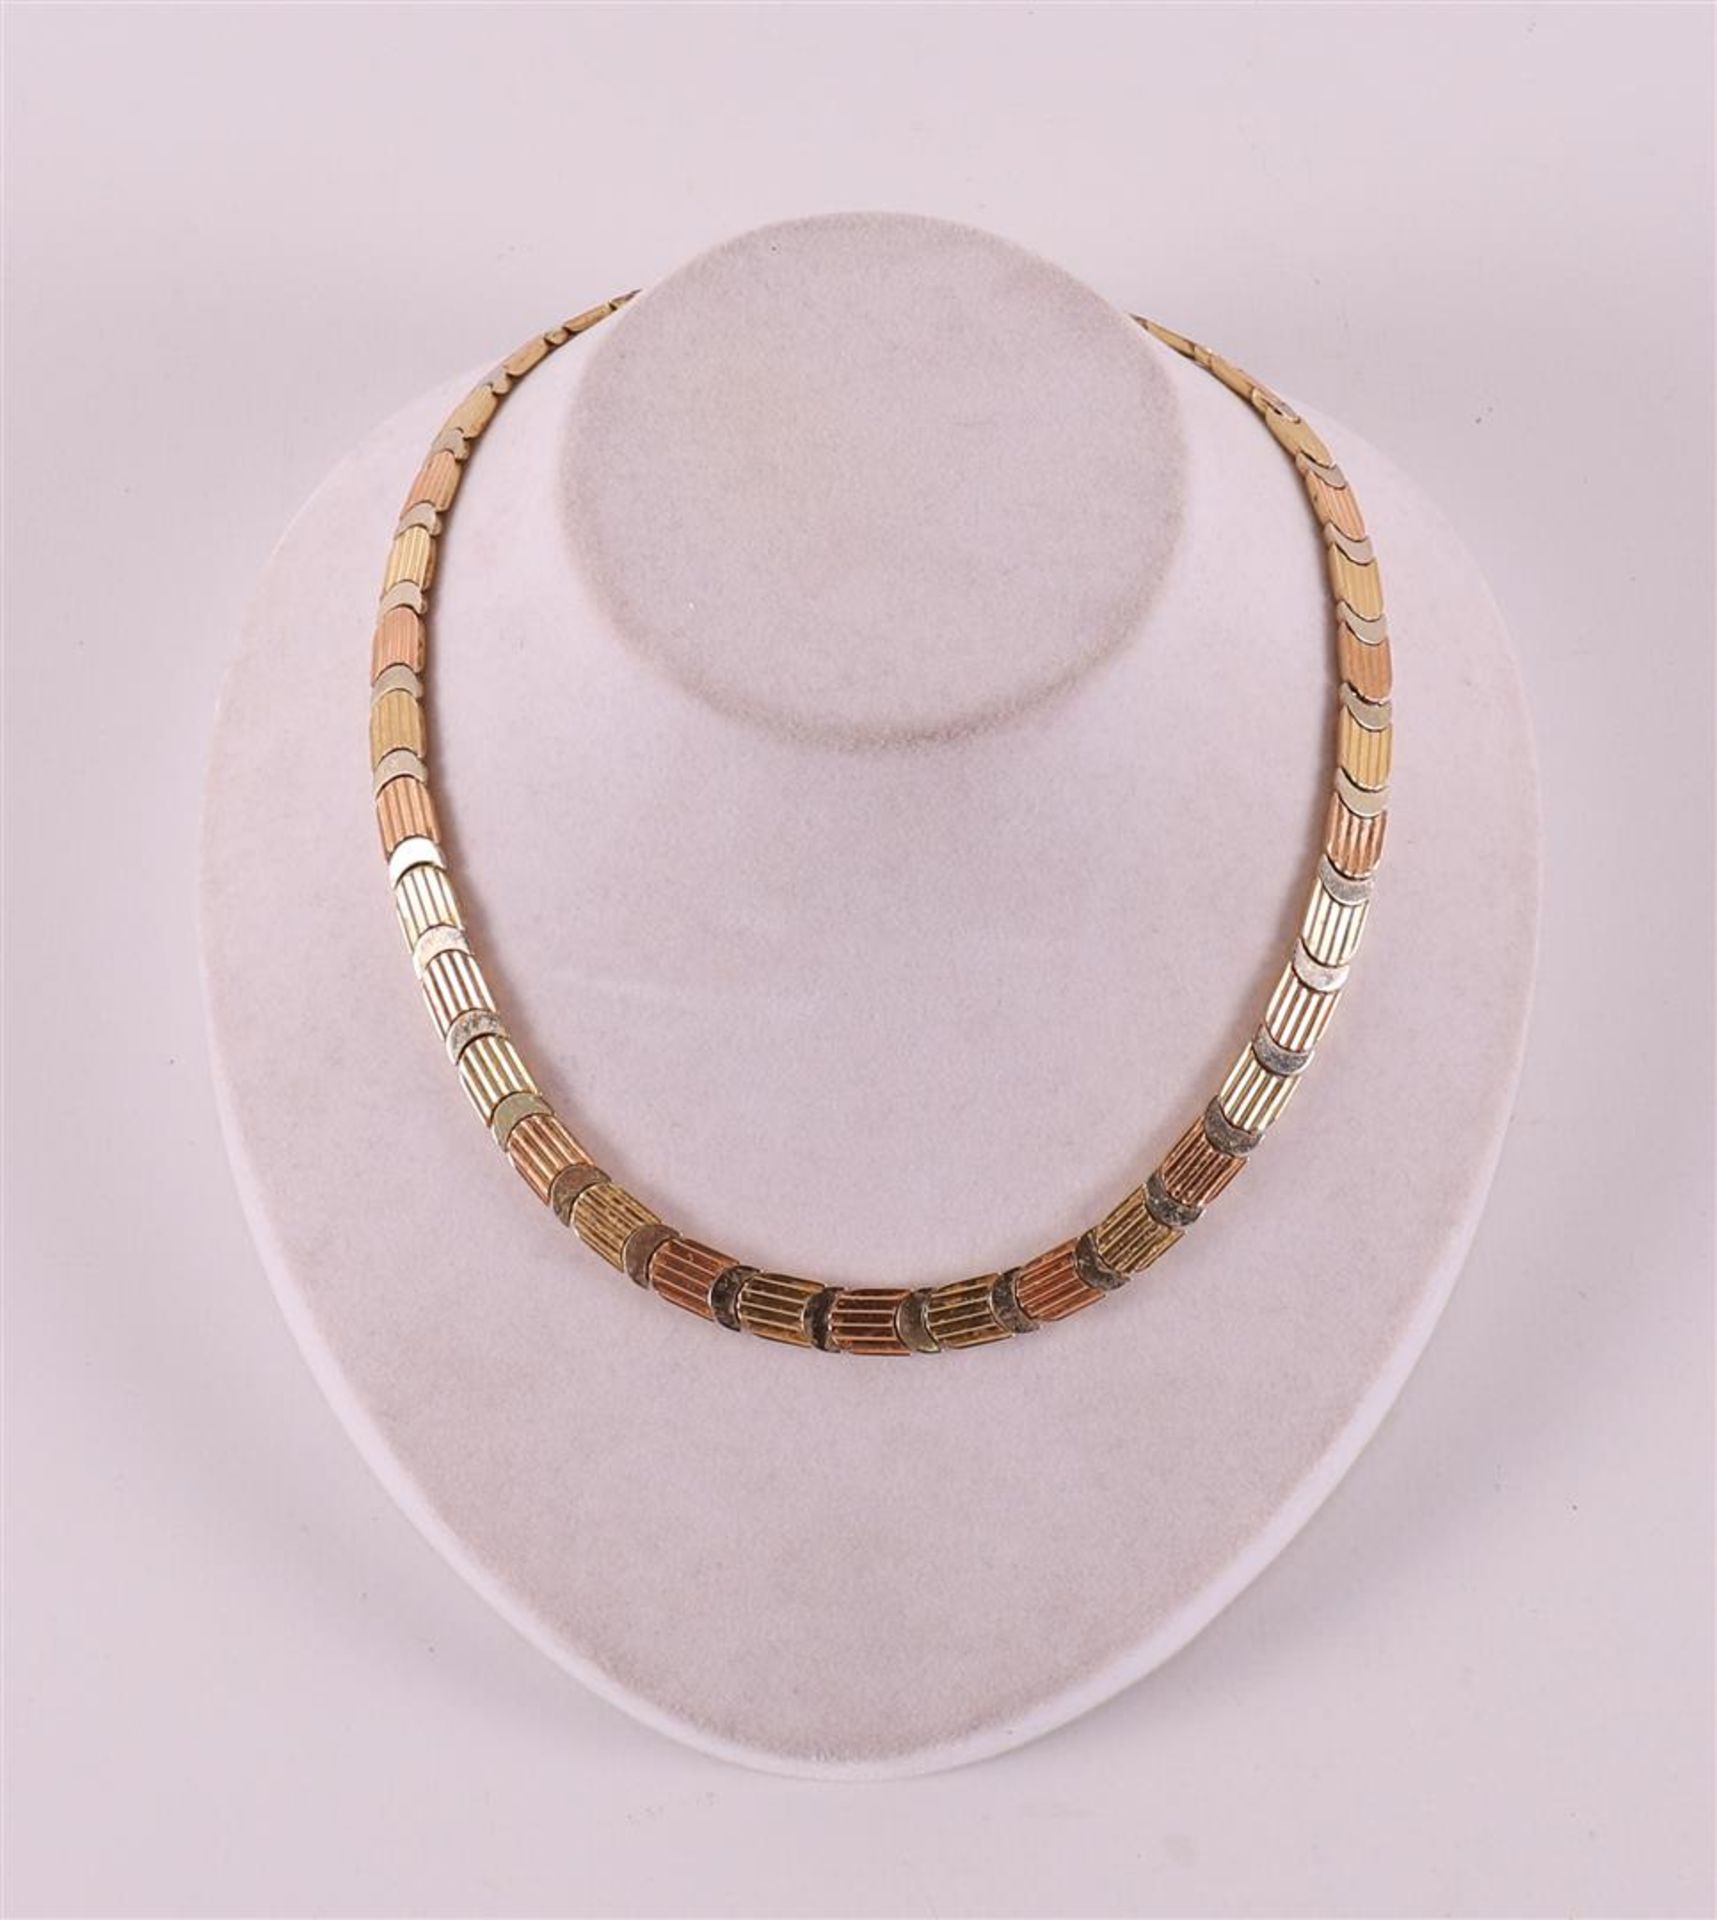 A fluted and matted tricolor vintage design necklace.